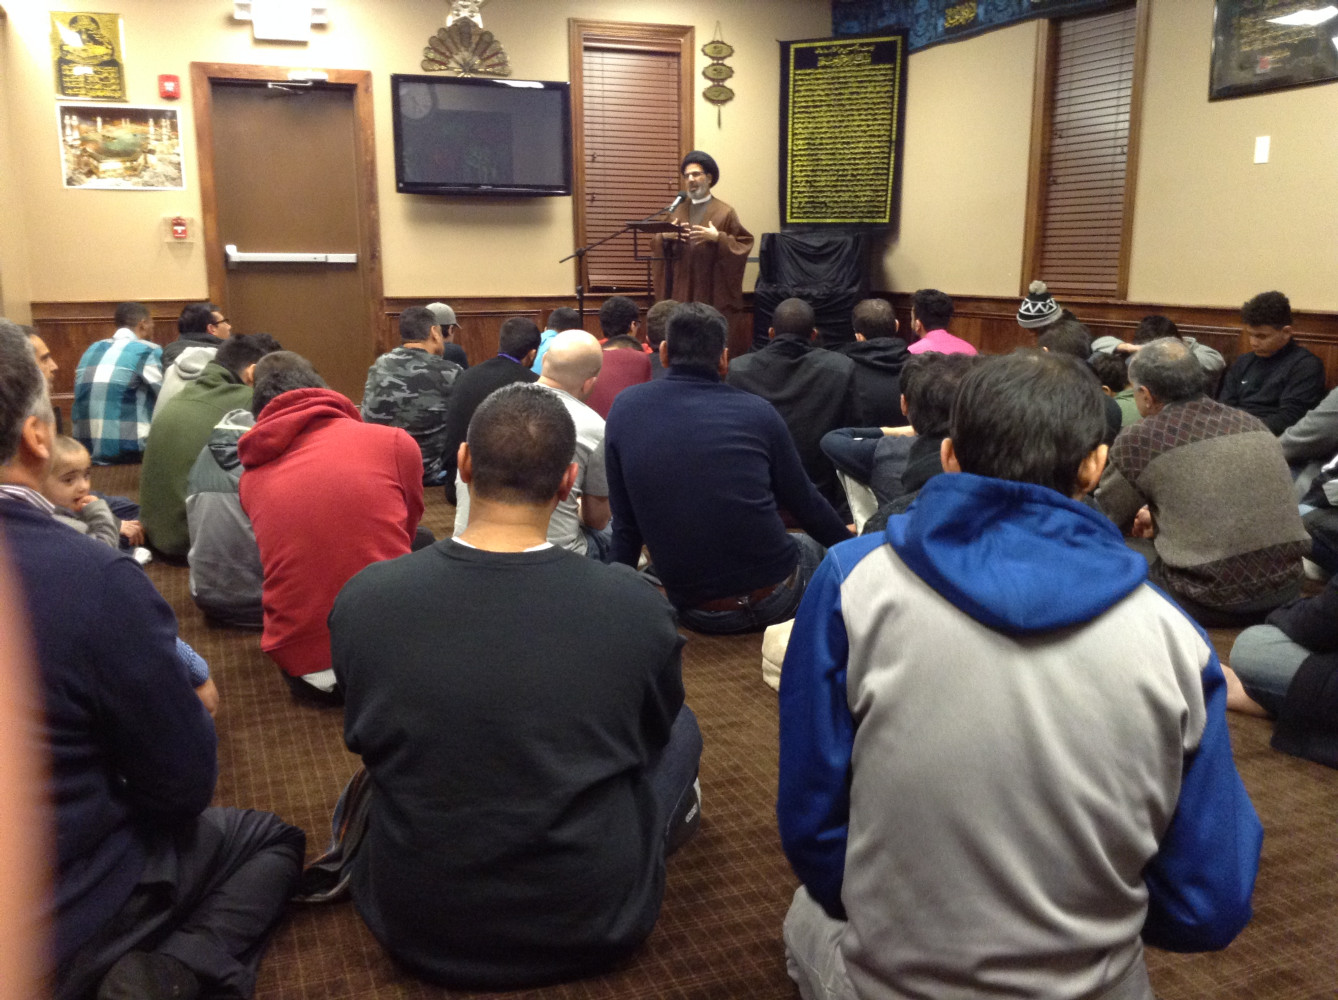 Sponsor of lecture event by Imam Qazwini at Indy Zainabia